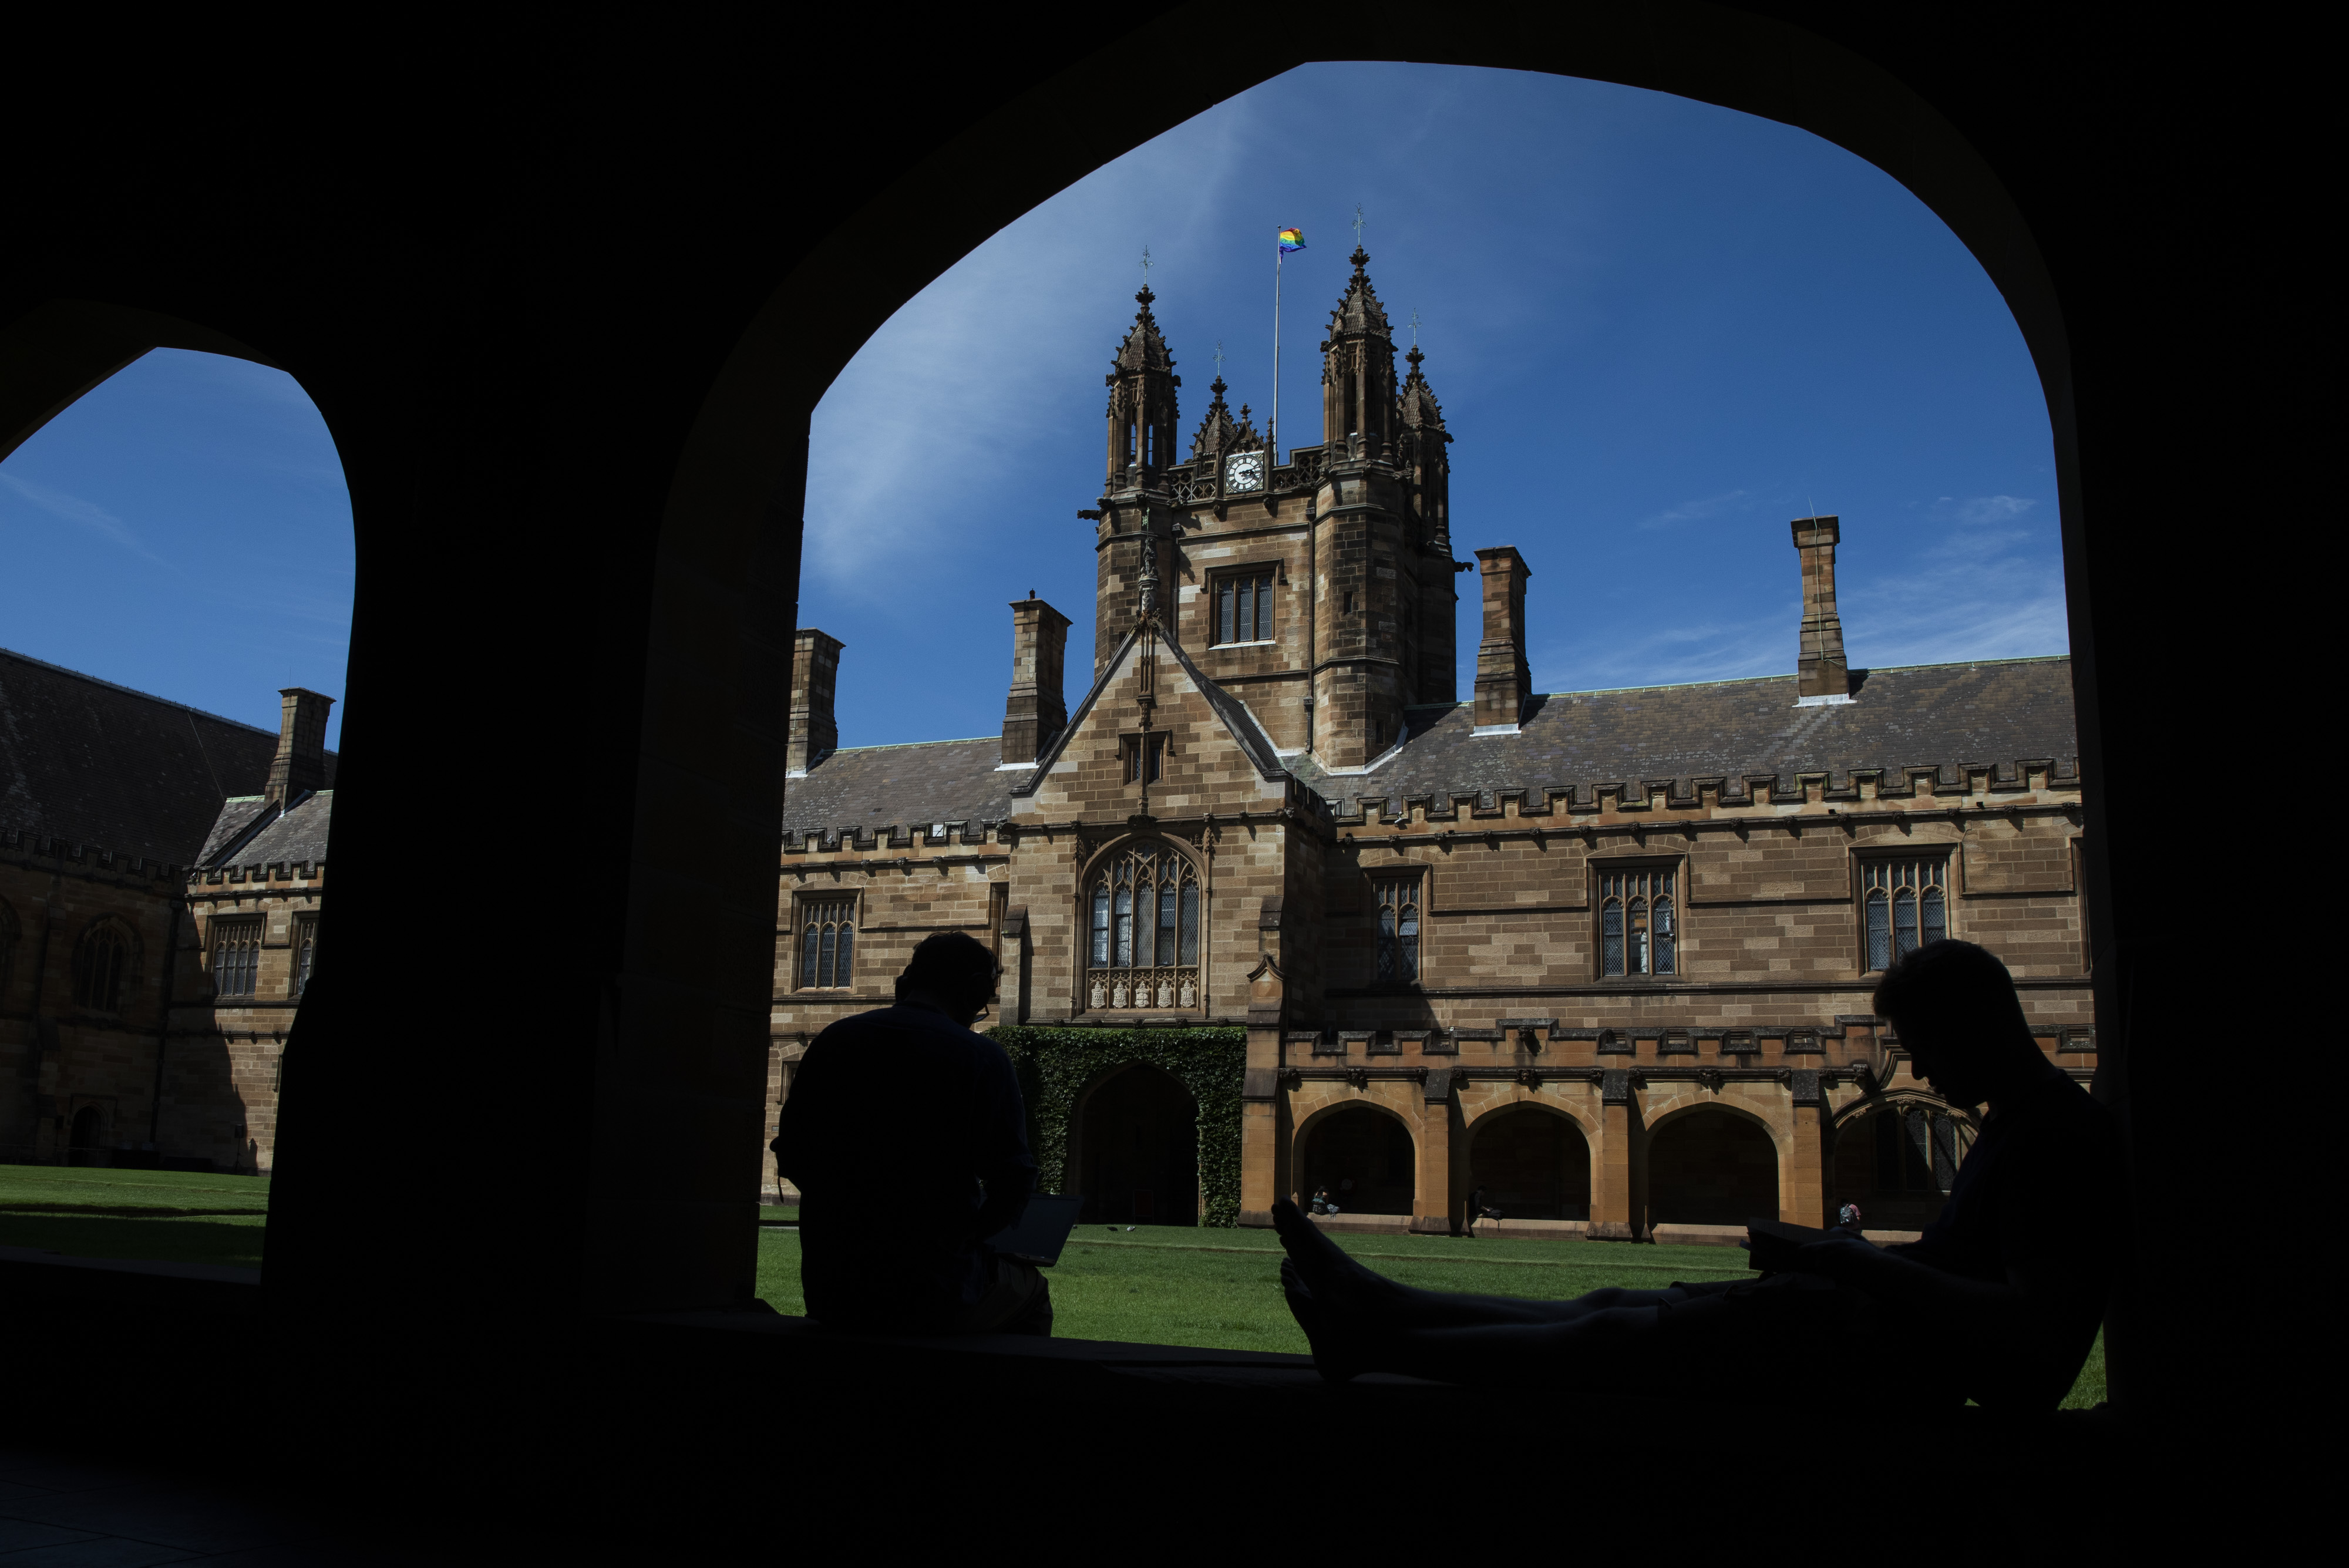 Students sit in the cloister of the quadrangle at the University of Sydney on Feb. 25.